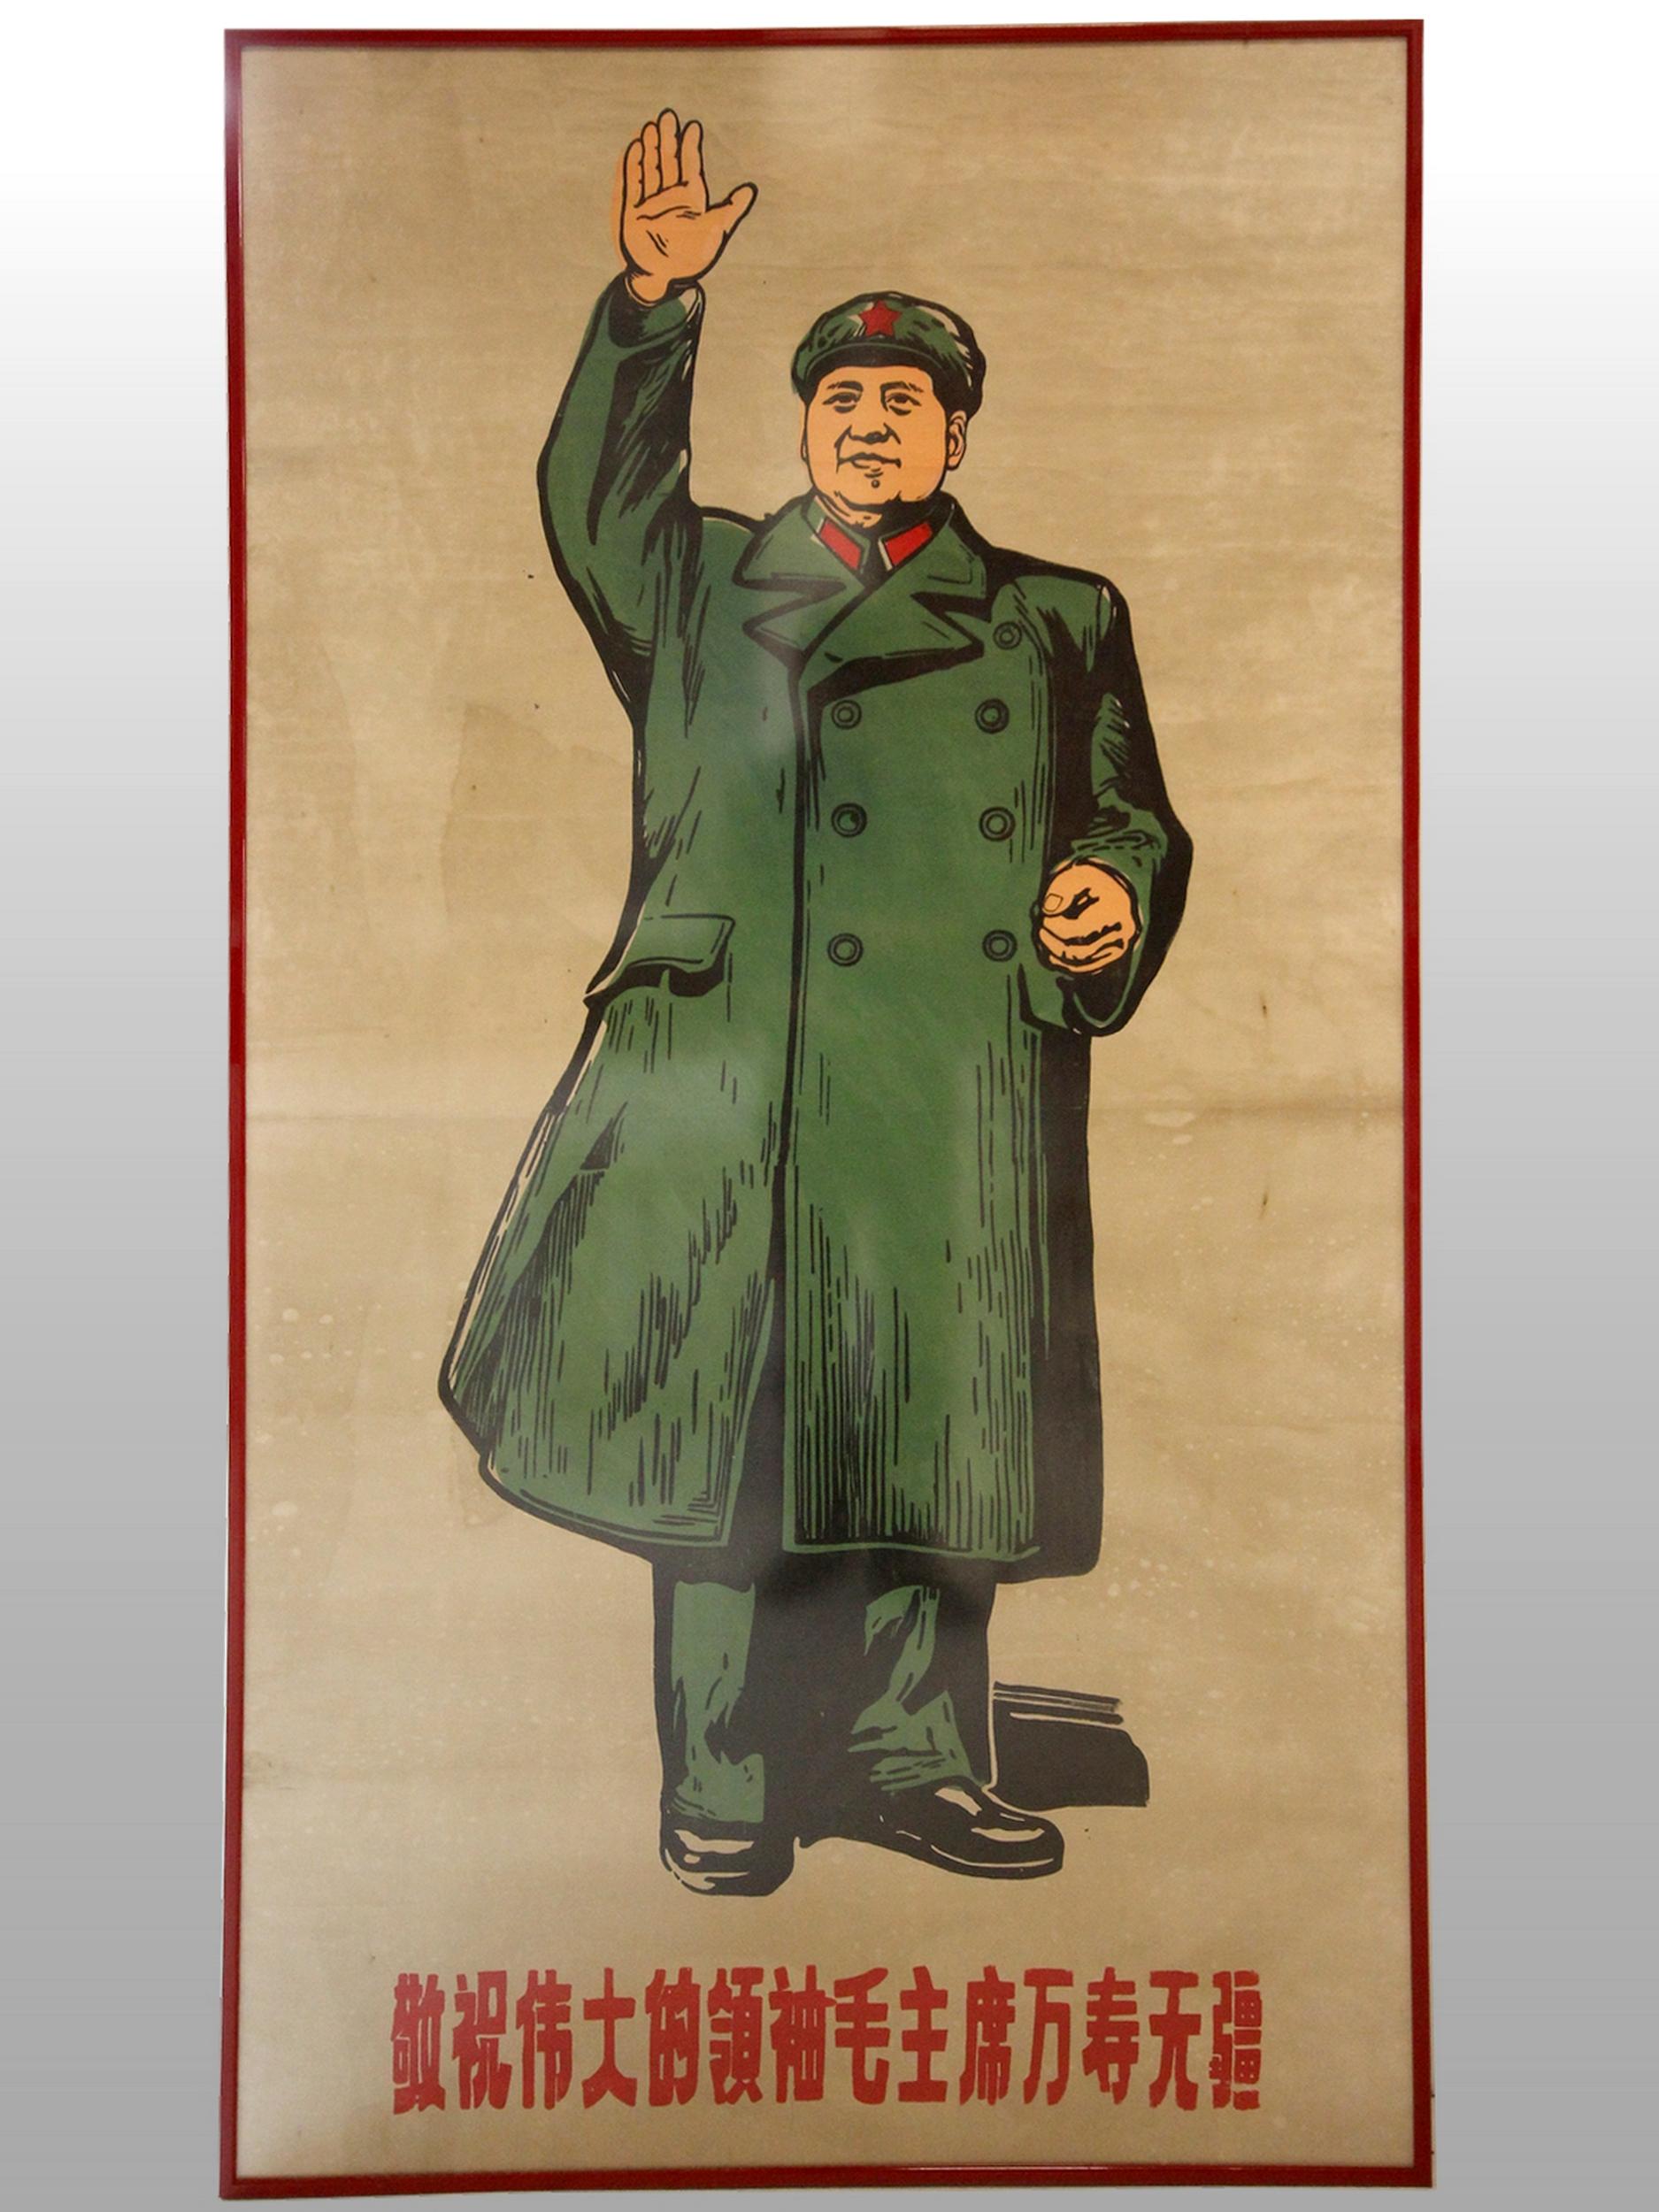 Large 1960s original poster of Mao Tse Toung, People's Republic of China, printed by the n°5 printing press in Beijing.

Recent framework with antireflective plexiglass.